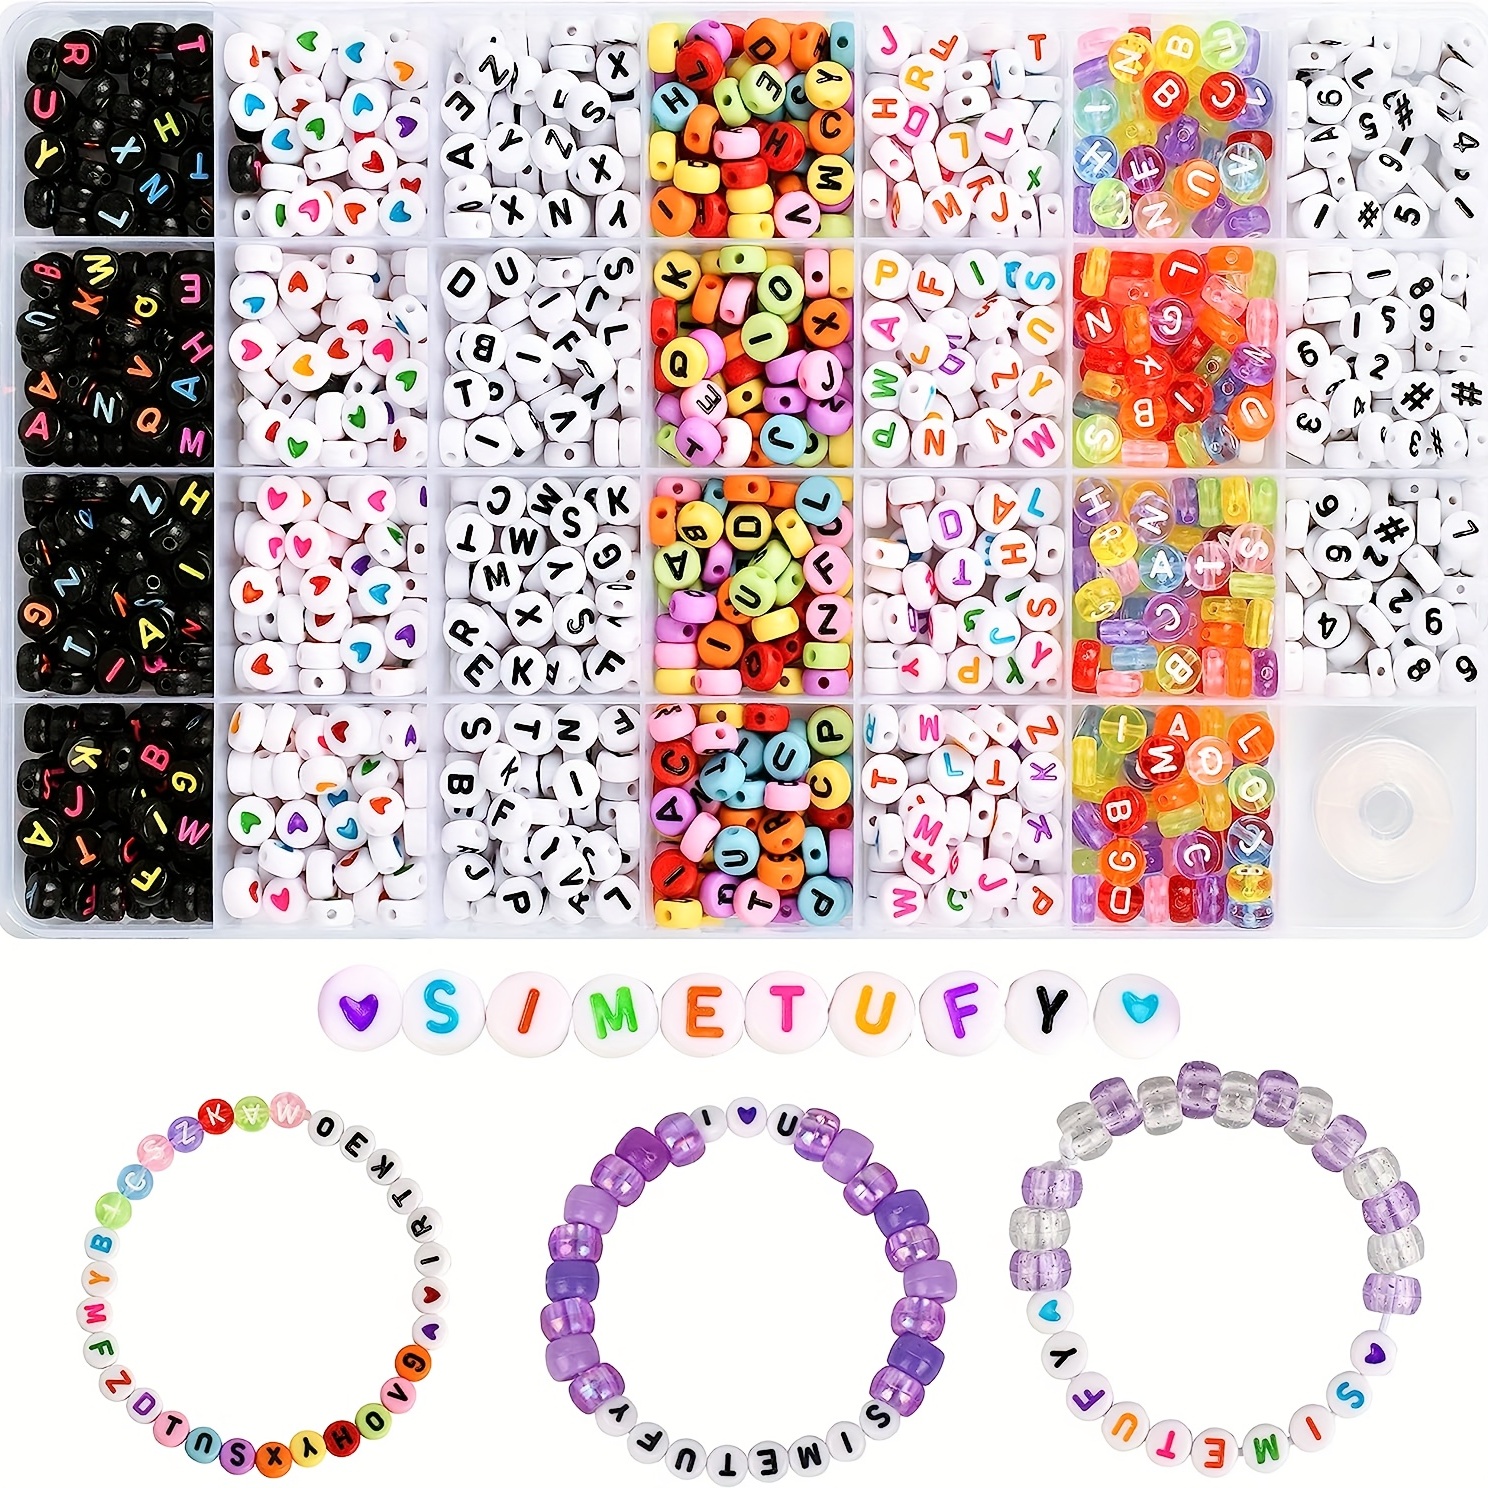 DUDUCOFU Bracelet Making Kit for Girls 6000 Pcs Beads, 24 Colors Clay Beads  for Bracelets, Jewelry, DIY Bracelet with Butterfly Beads Pearl Letter for